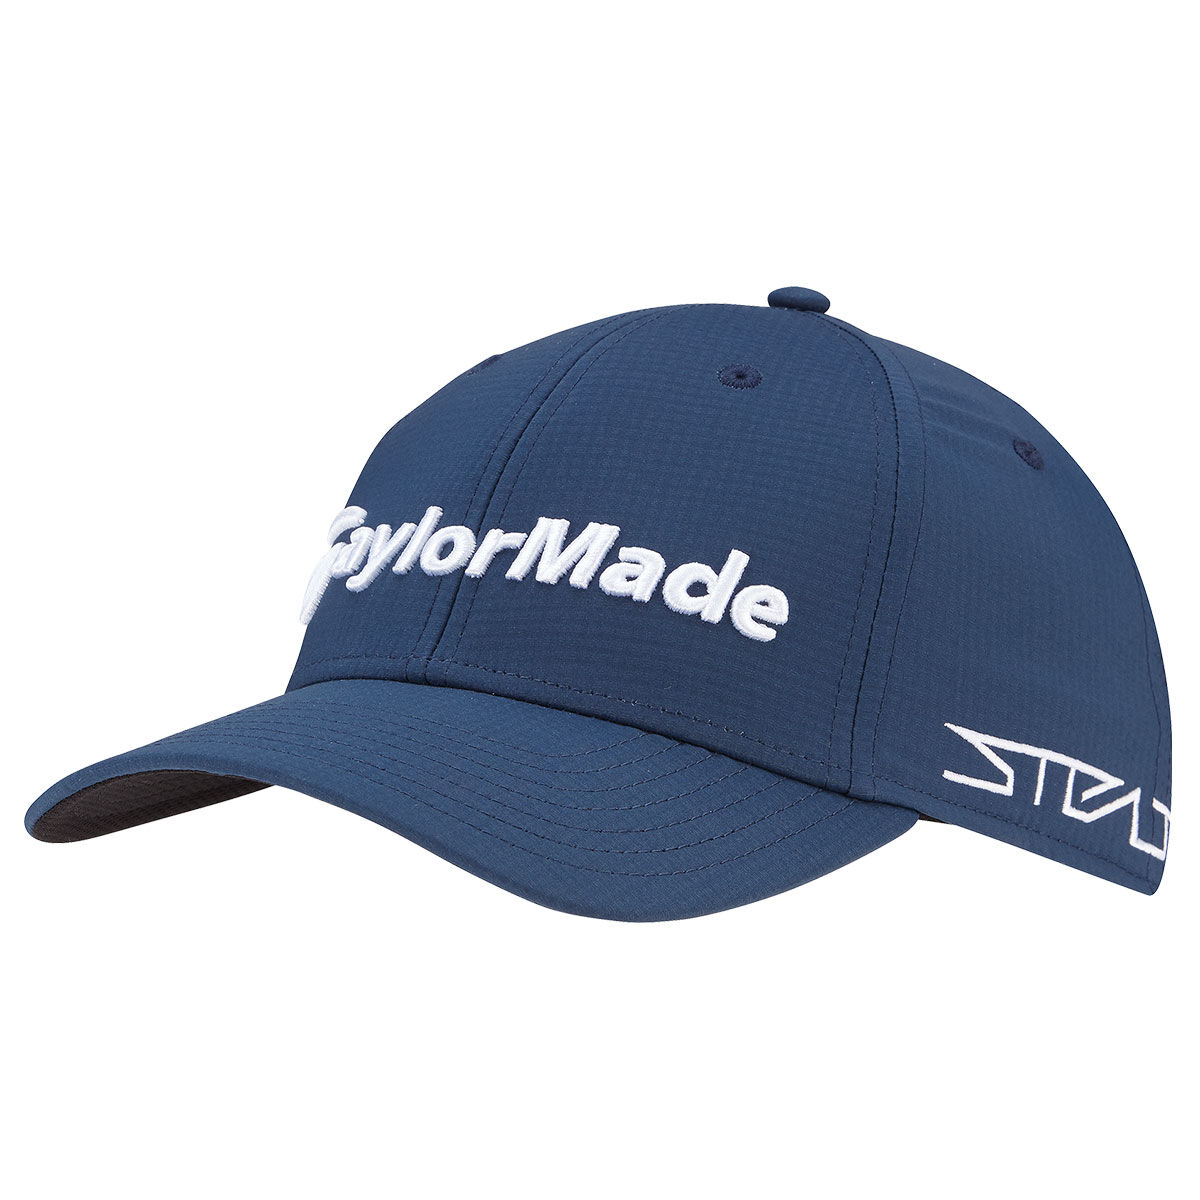 TaylorMade Men's Navy Blue and White Comfortable Embroidered Tour Radar Golf Cap | American Golf, One Size von TaylorMade